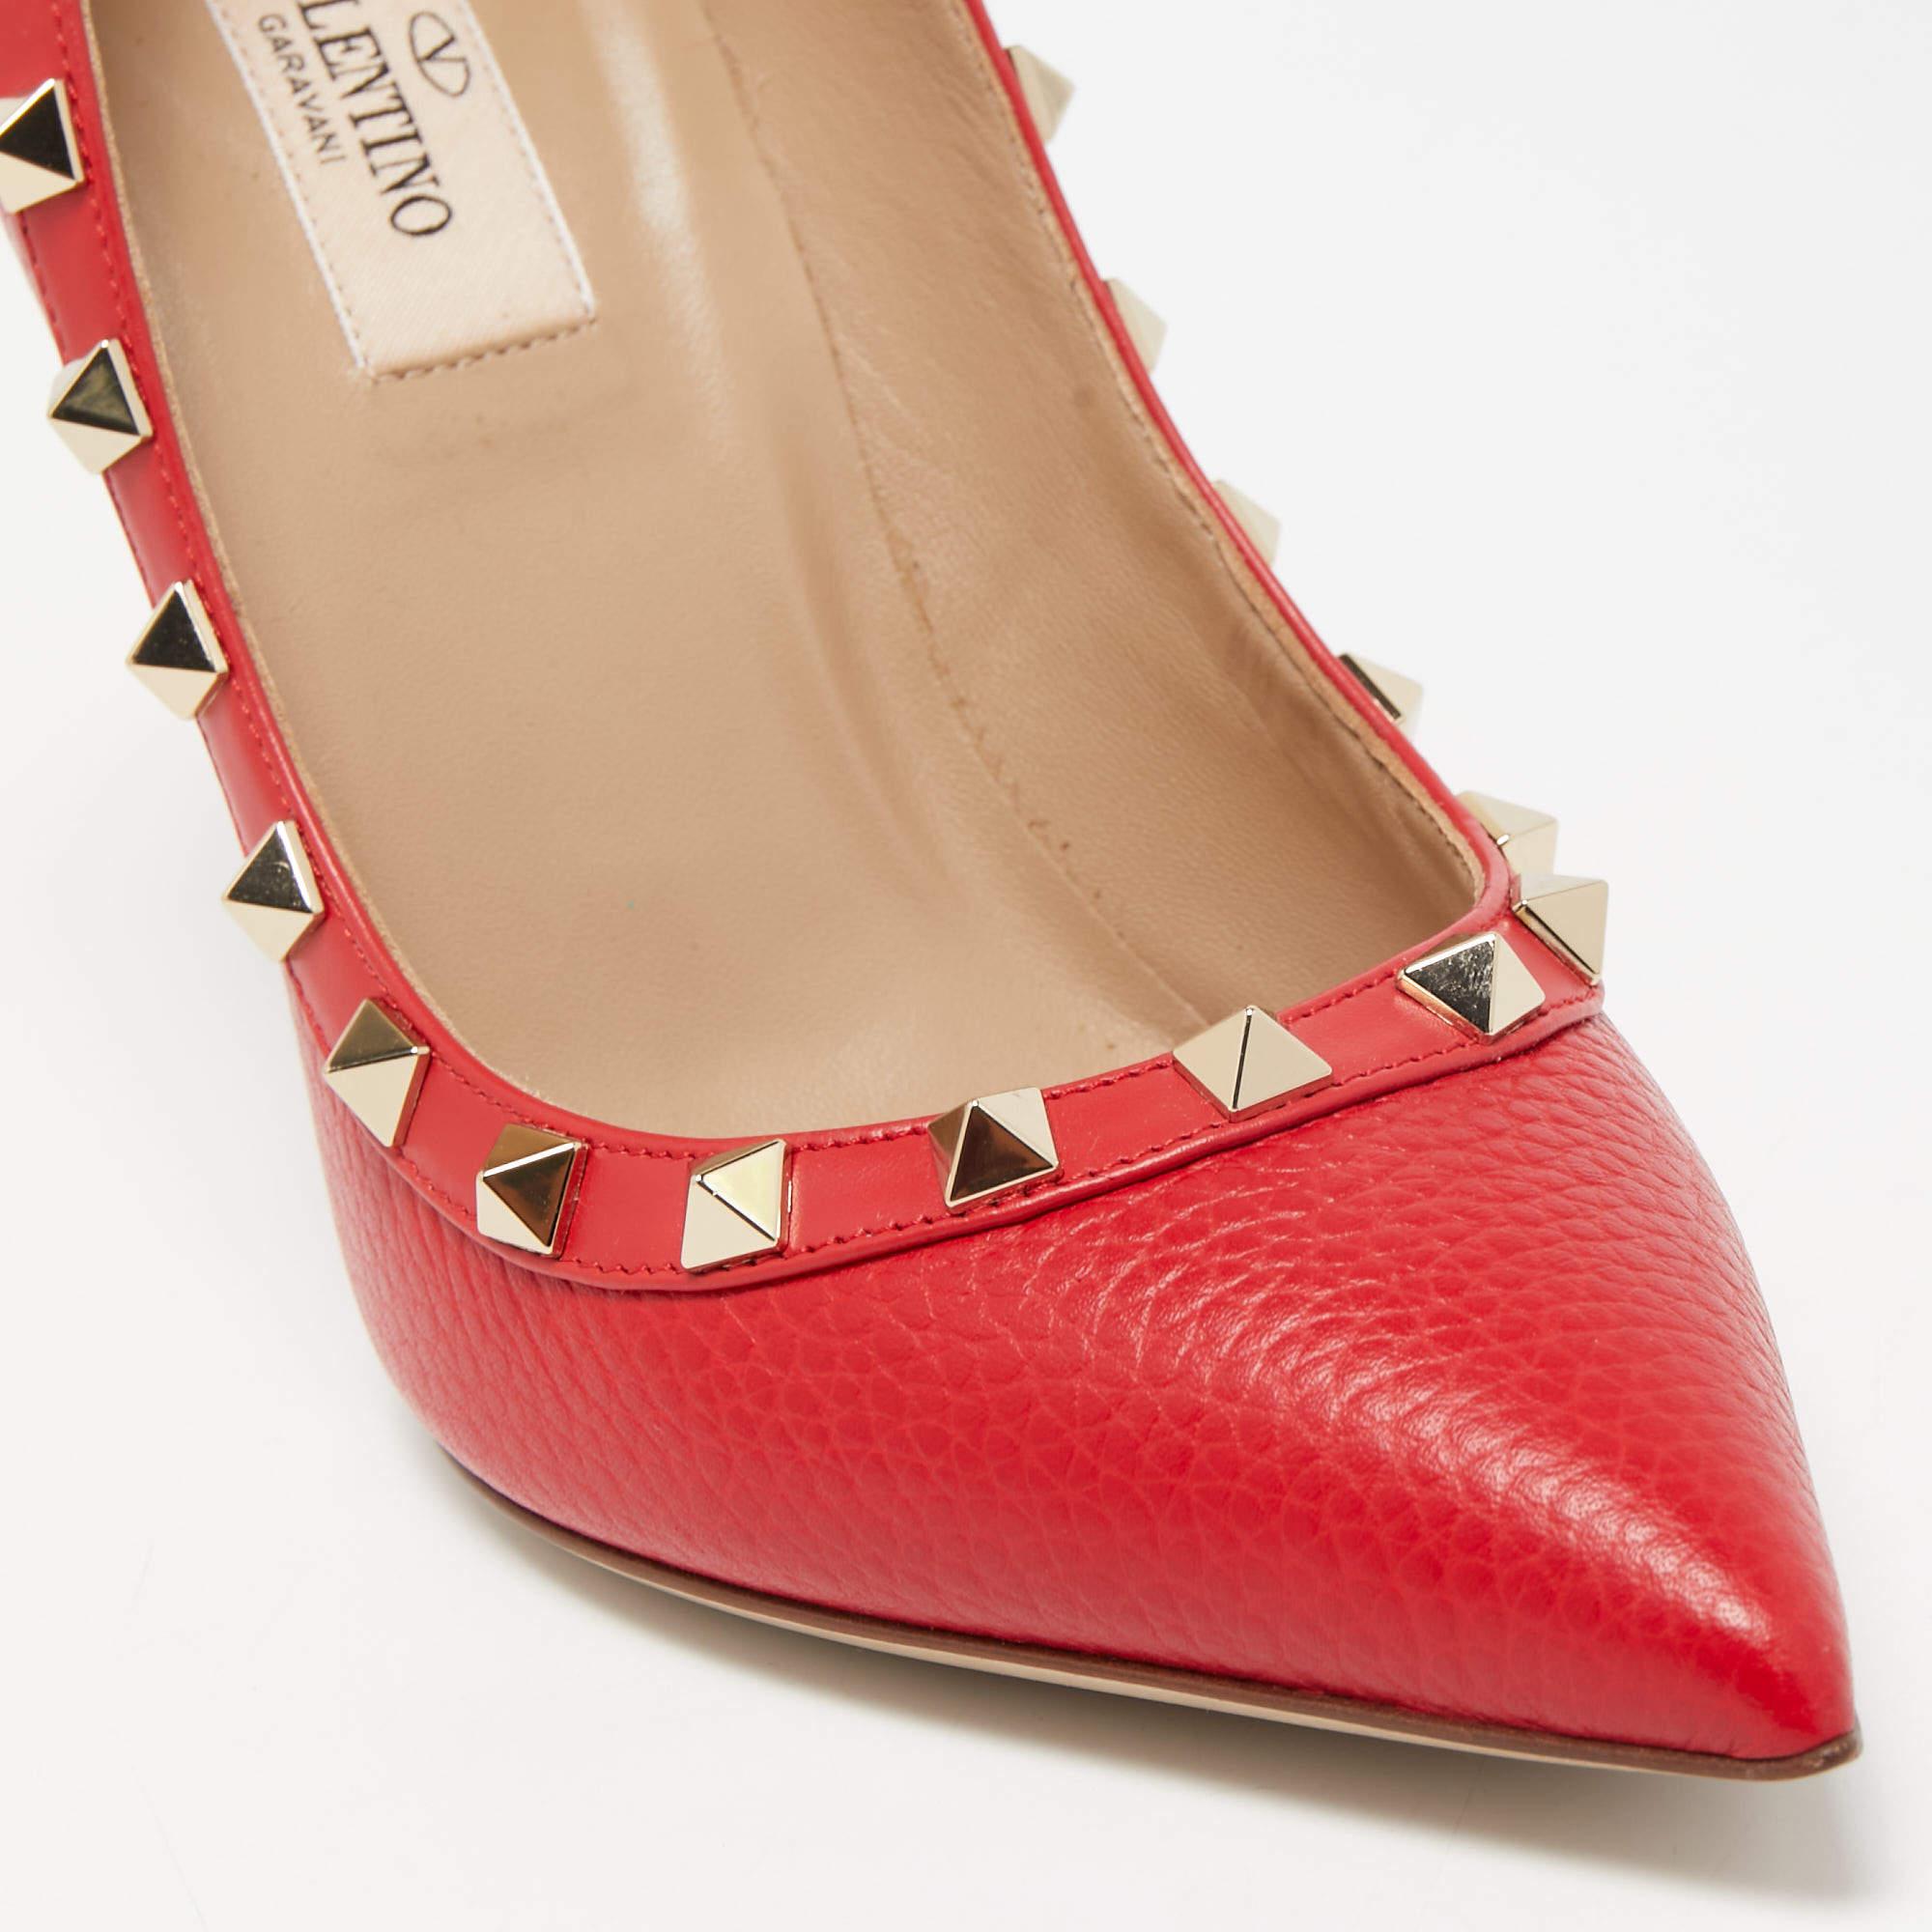 Valentino Red Leather Rockstud Pumps Size 36 2